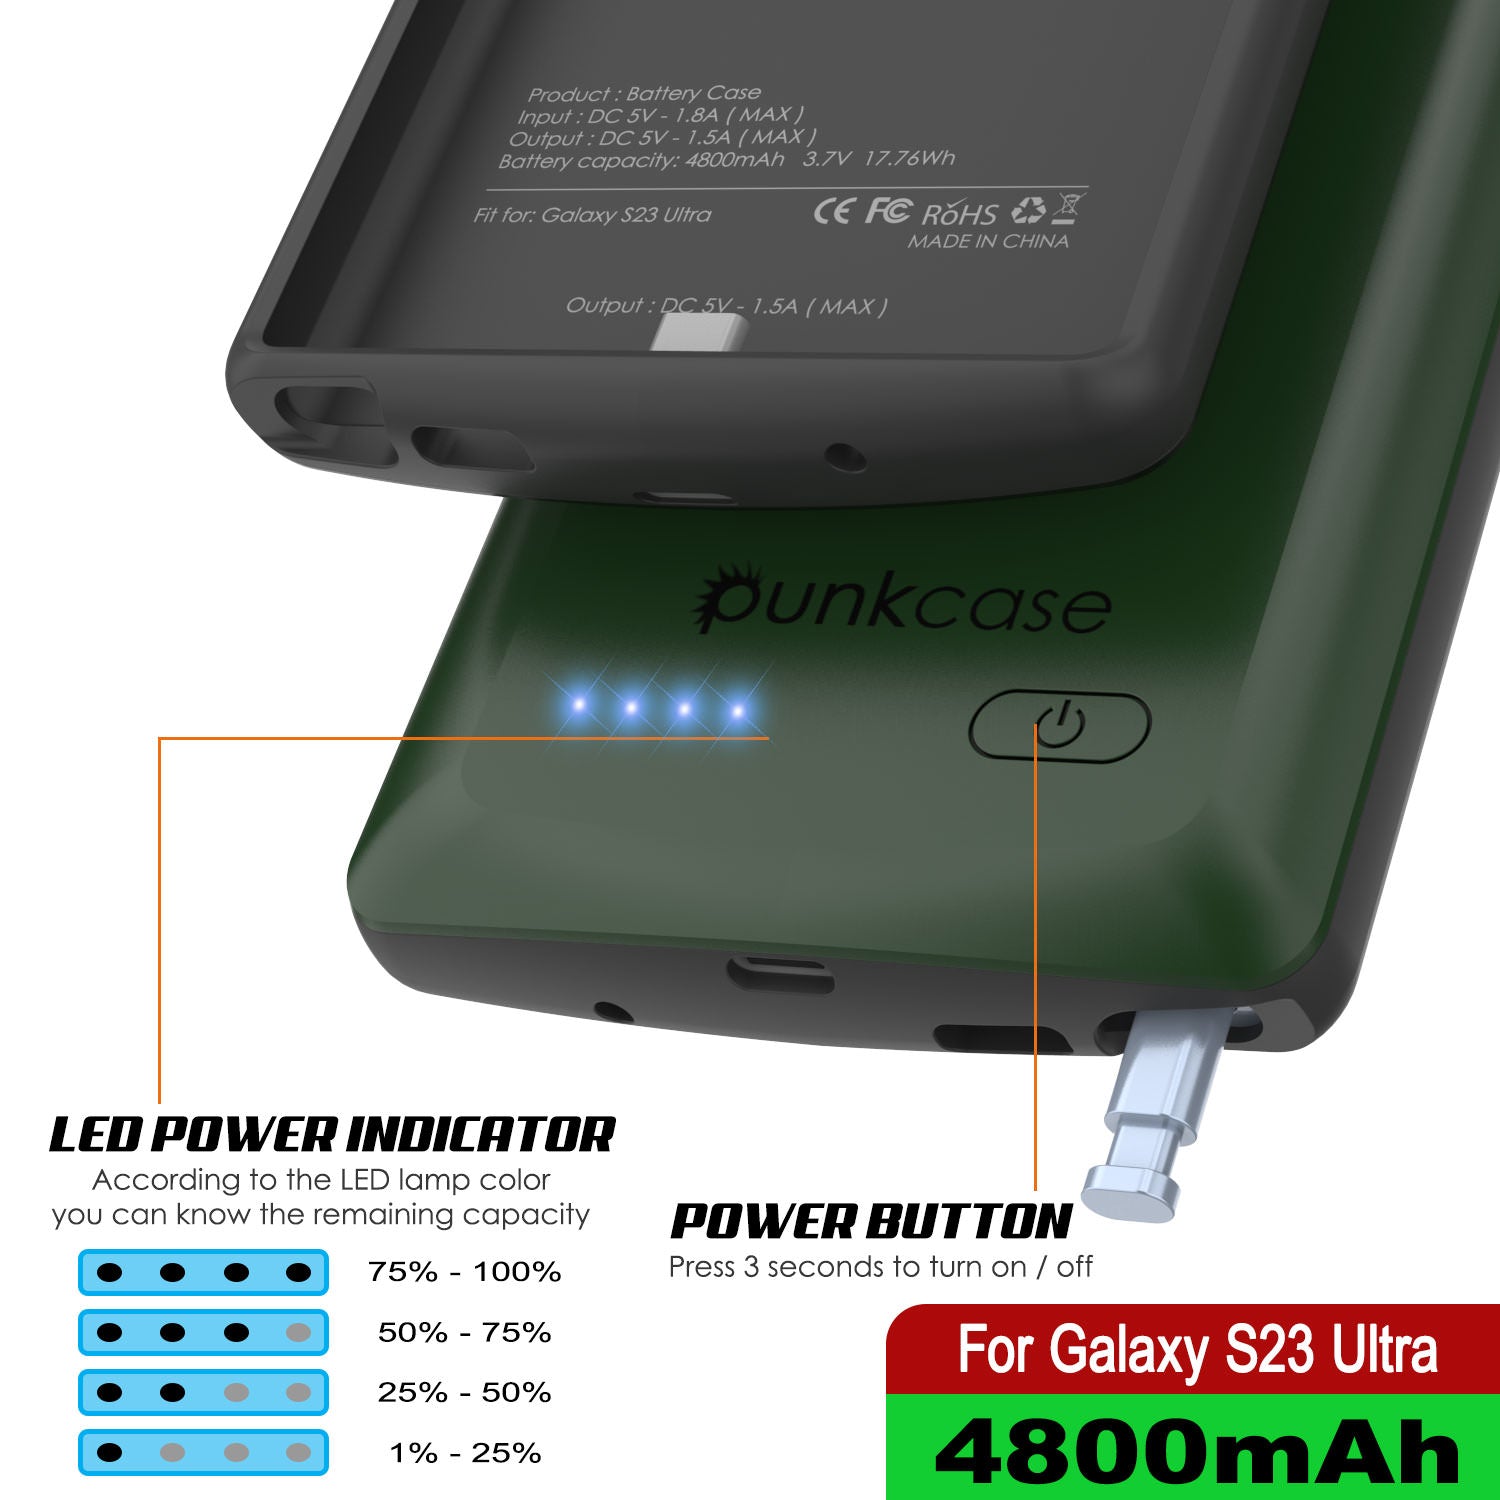 PunkJuice S23 Ultra Battery Case Green - Portable Charging Power Juice Bank with 4800mAh